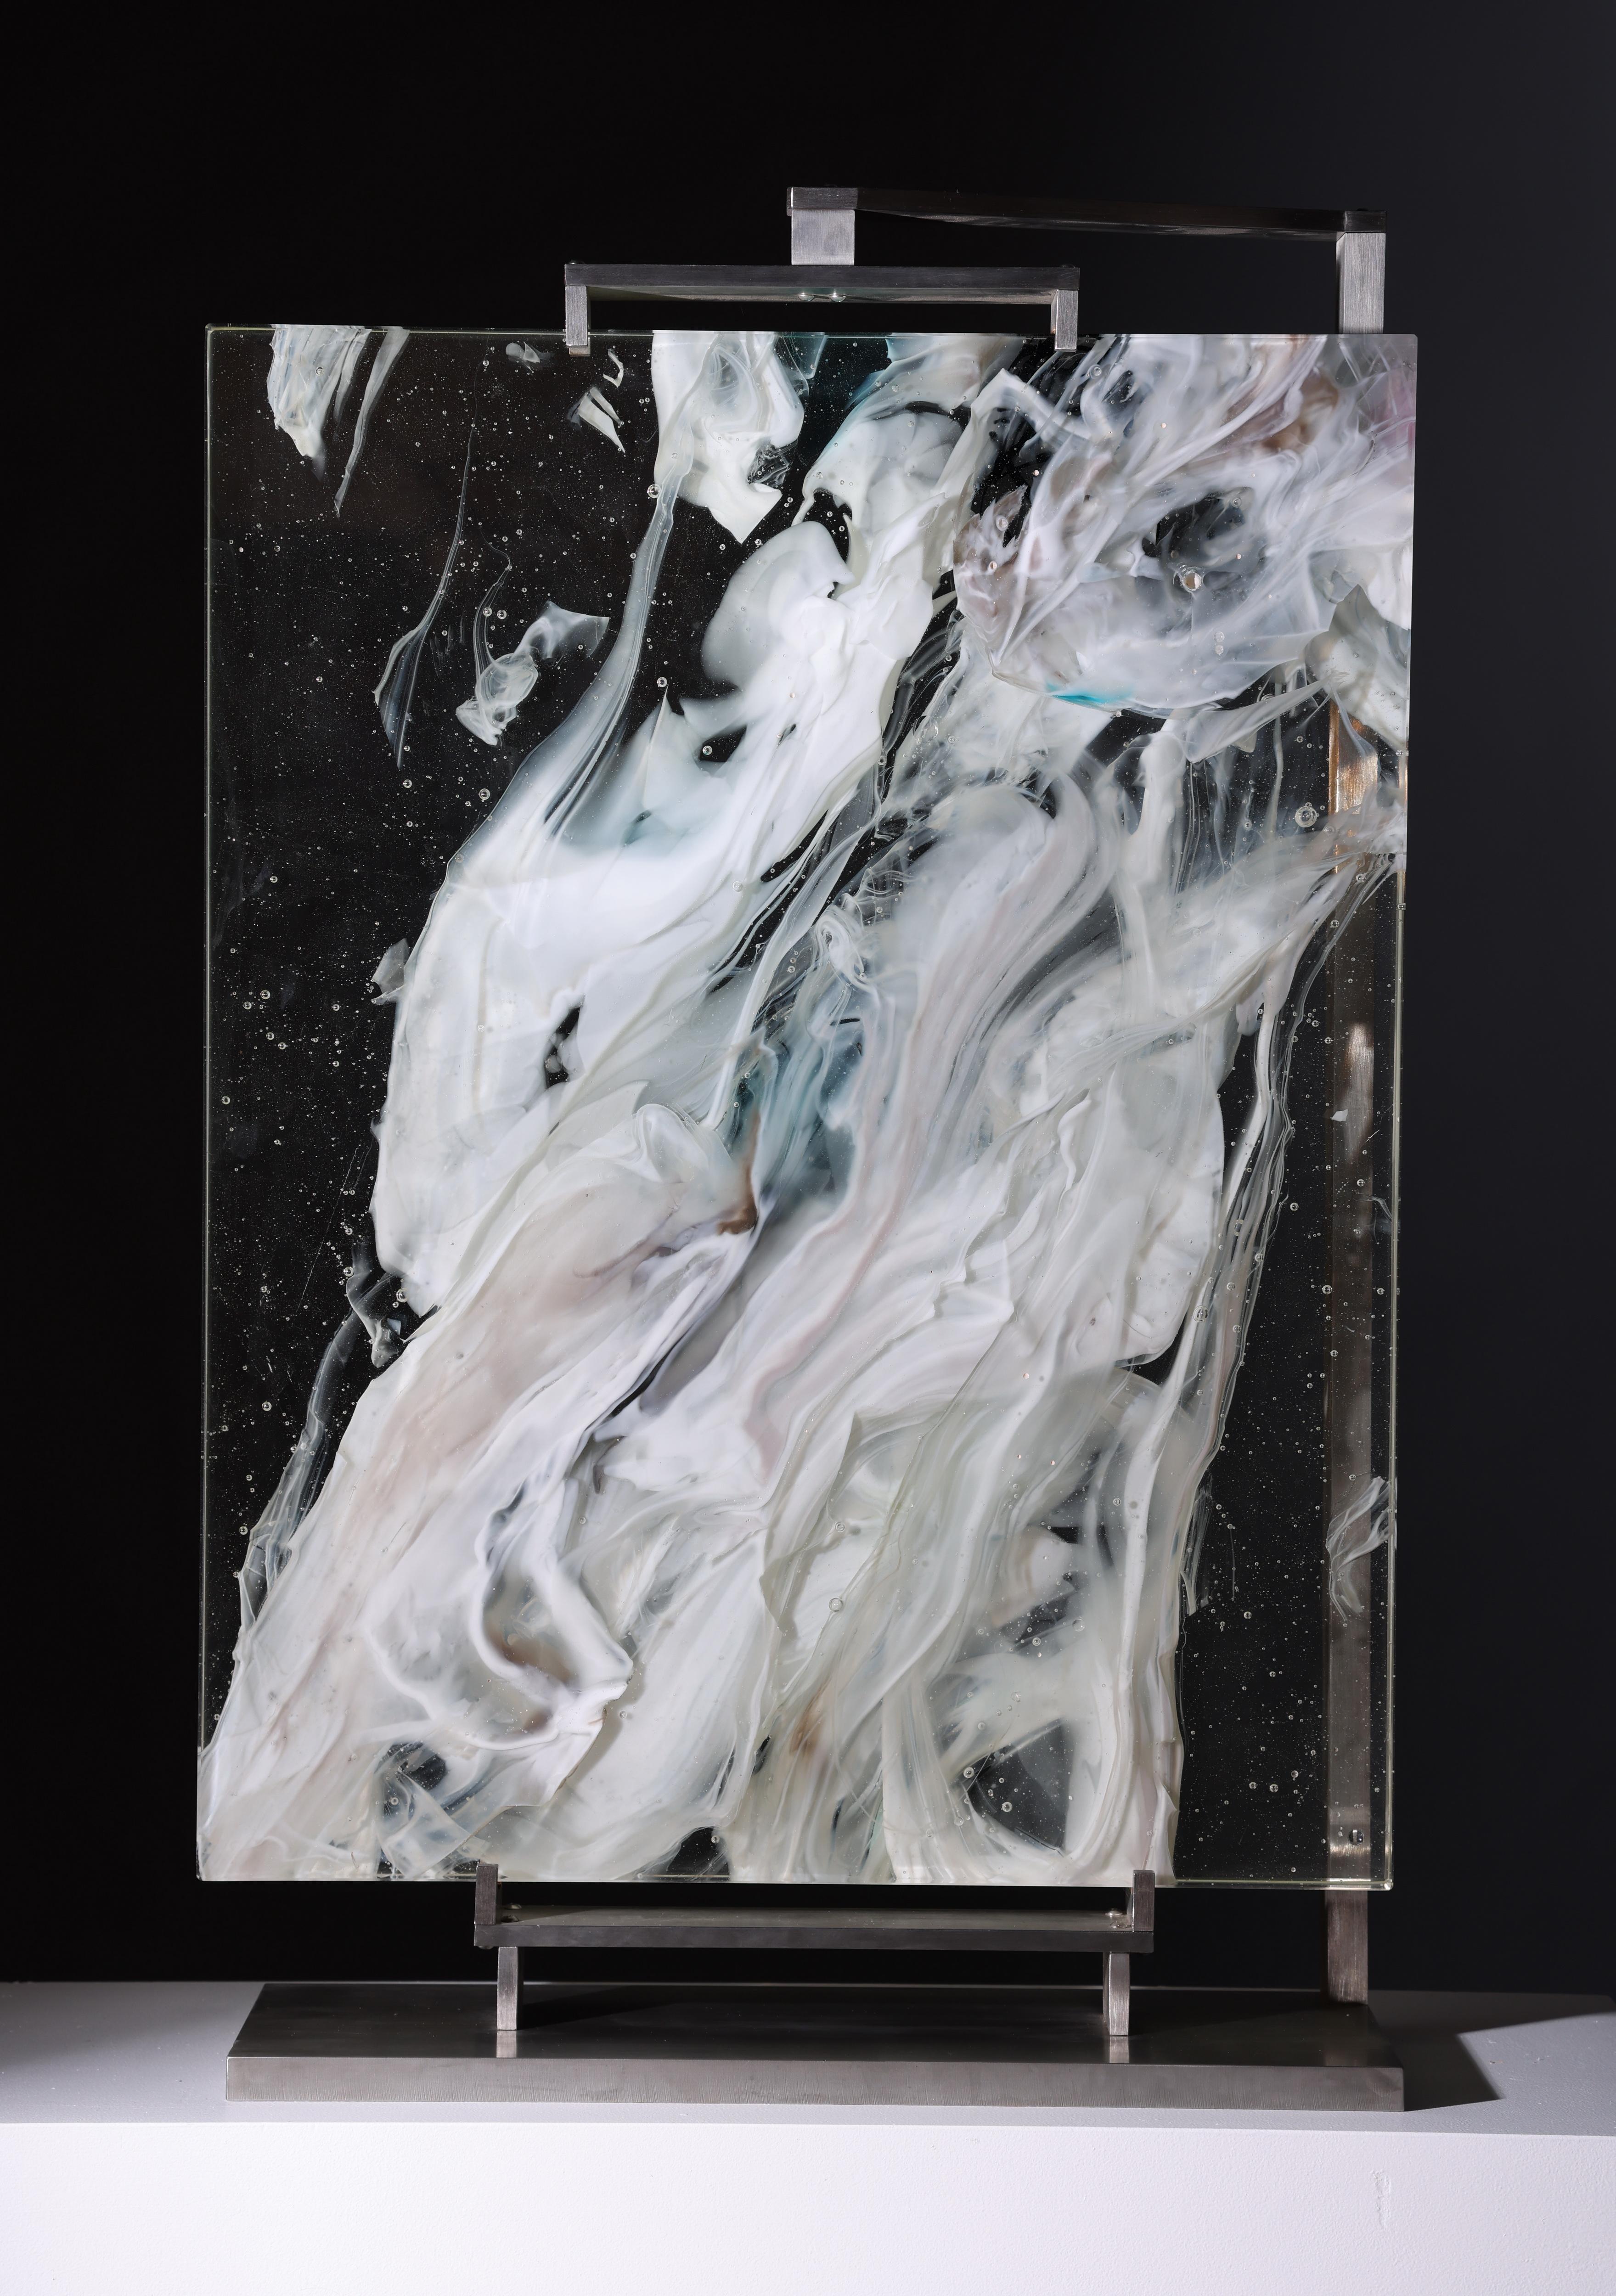 Cloud Study #6 is a contemporary abstract glass sculpture by David Ruth from his Cloud Study Series. It contains hues of white, yellow and black painterly brushstroke formations in glass called trails. Trails are created through rolling molten glass